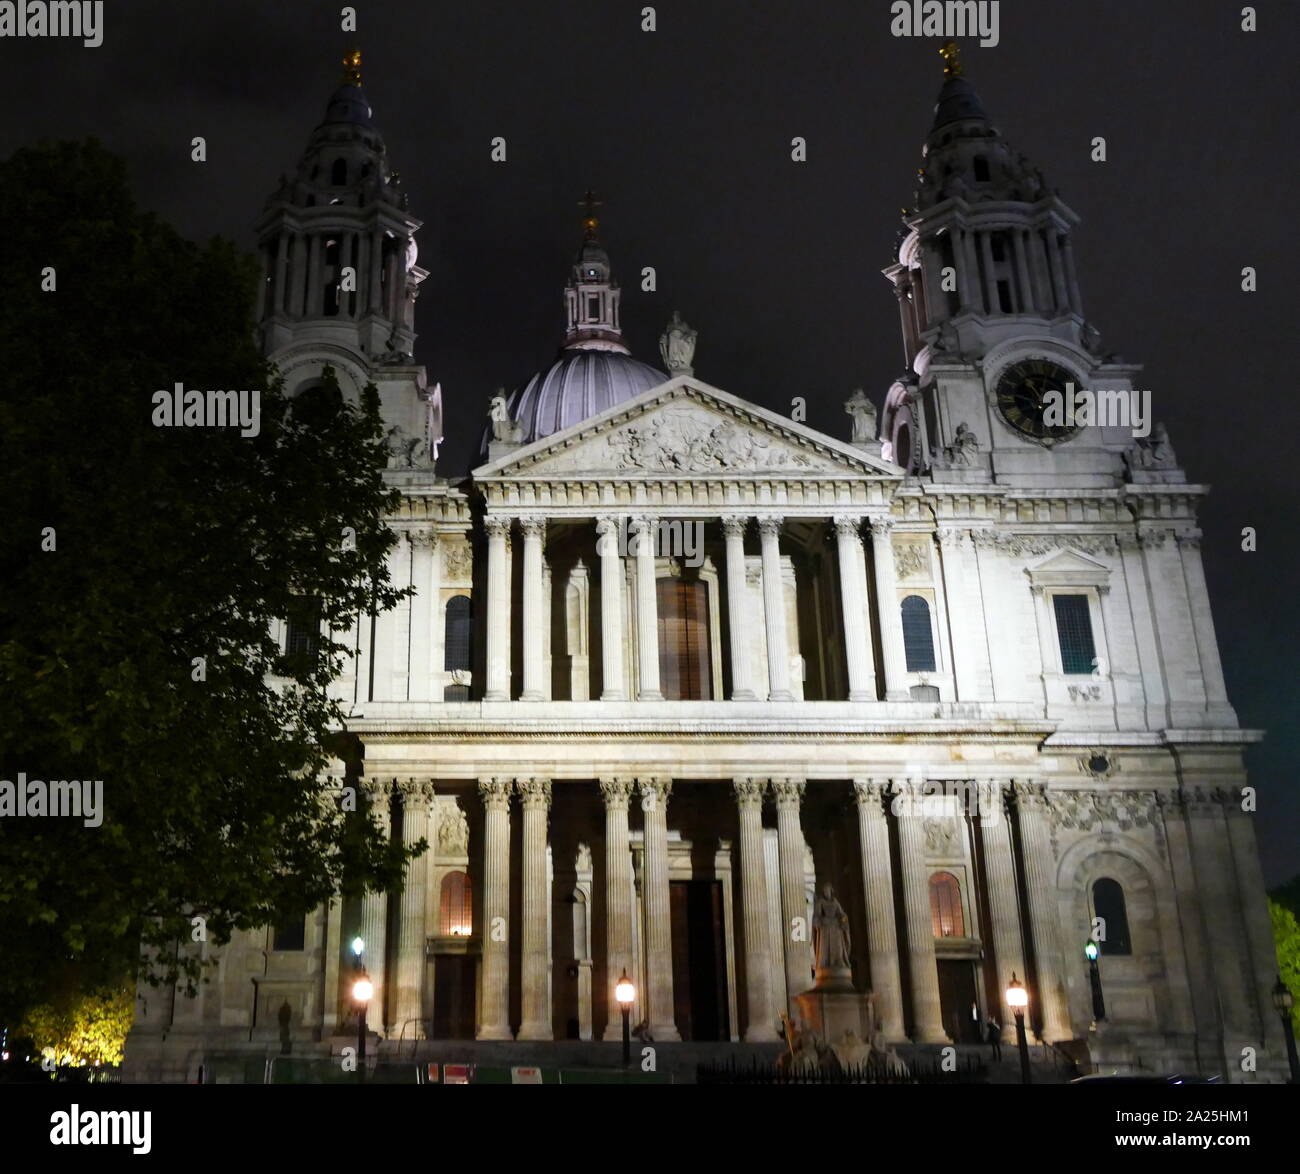 St Paul's Cathedral, London, is an Anglican cathedral, the seat of the Bishop of London and the mother church of the Diocese of London. The cathedral, dating from the late 17th century, was designed in the English Baroque style by Sir Christopher Wren. Stock Photo